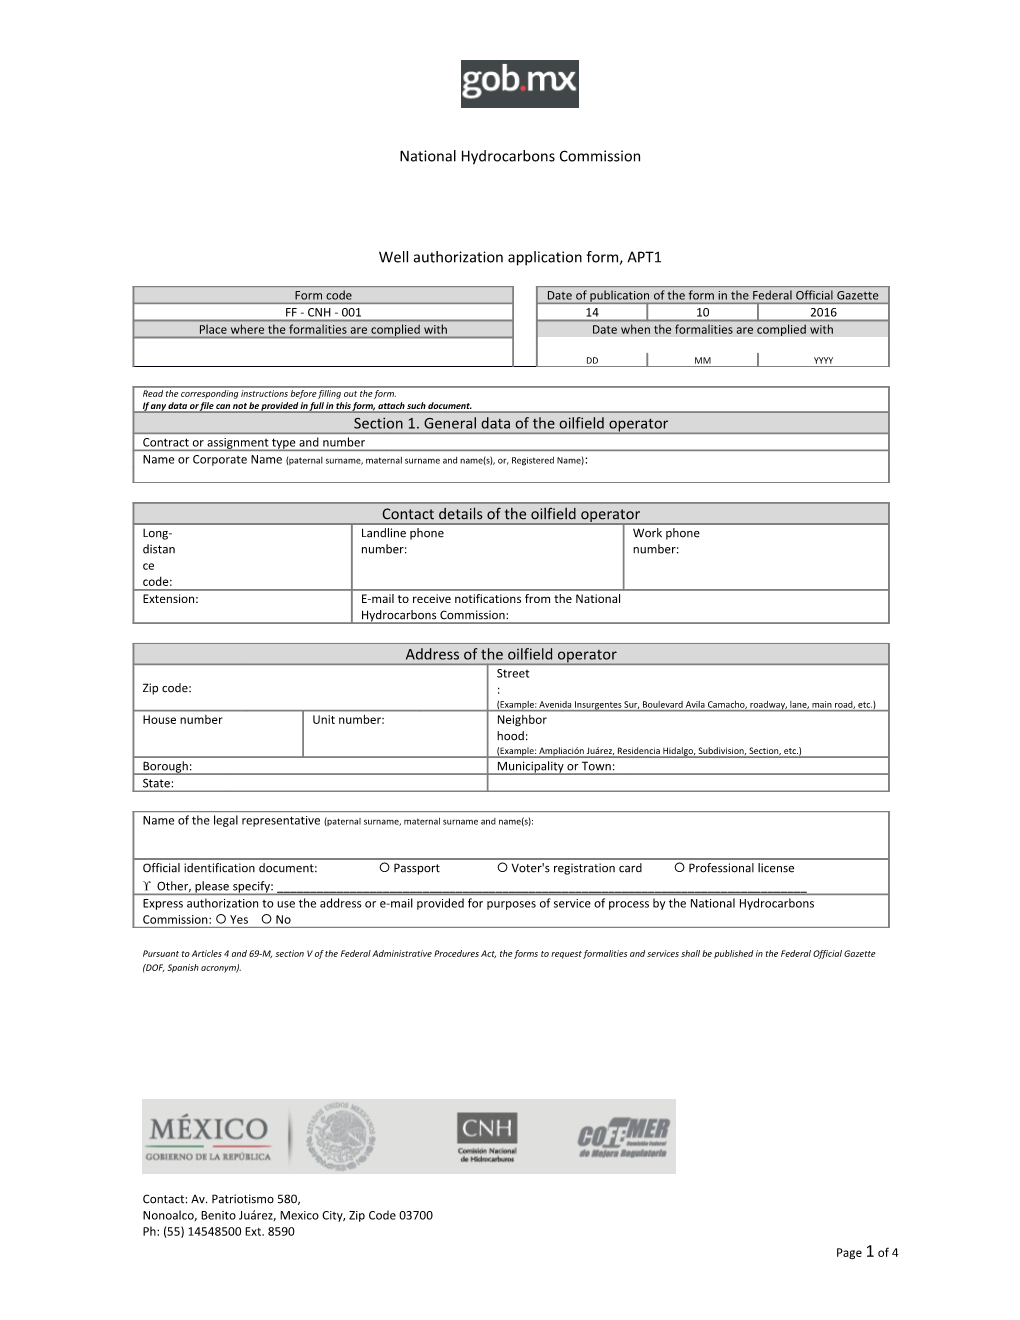 Well Authorization Application Form, APT1